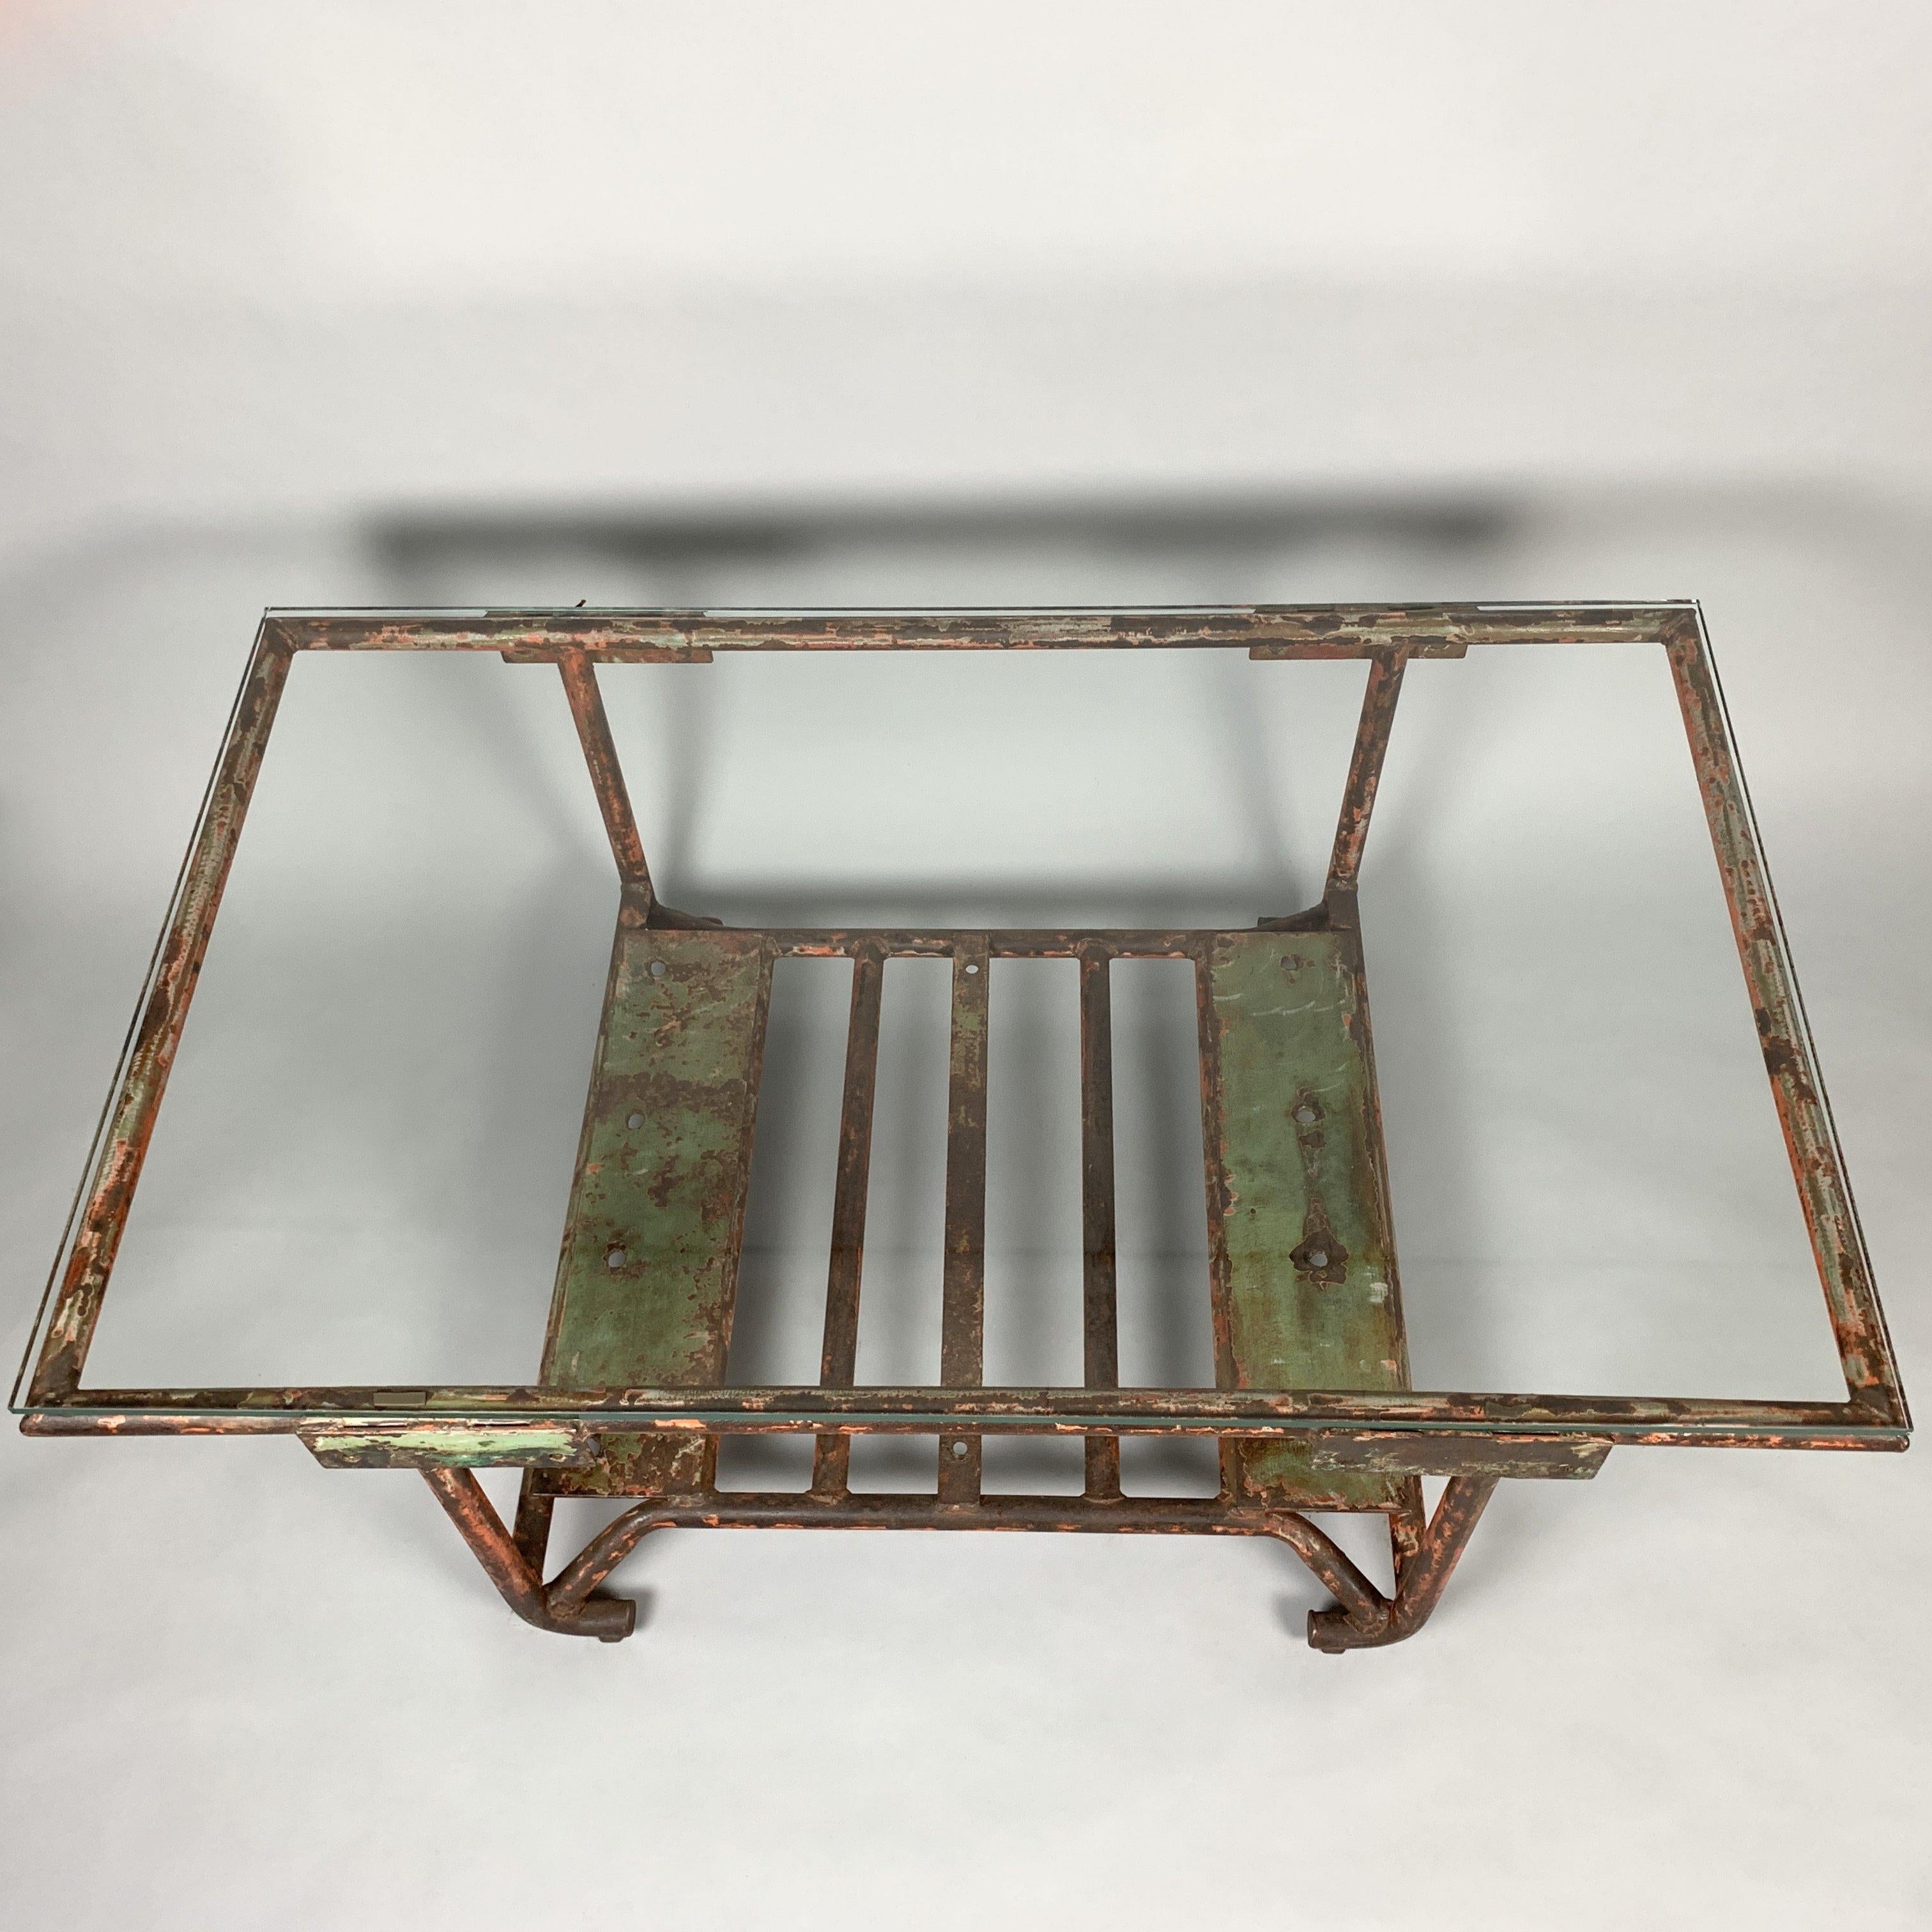 Czech Vintage Industrial Iron and Glass Coffee Table